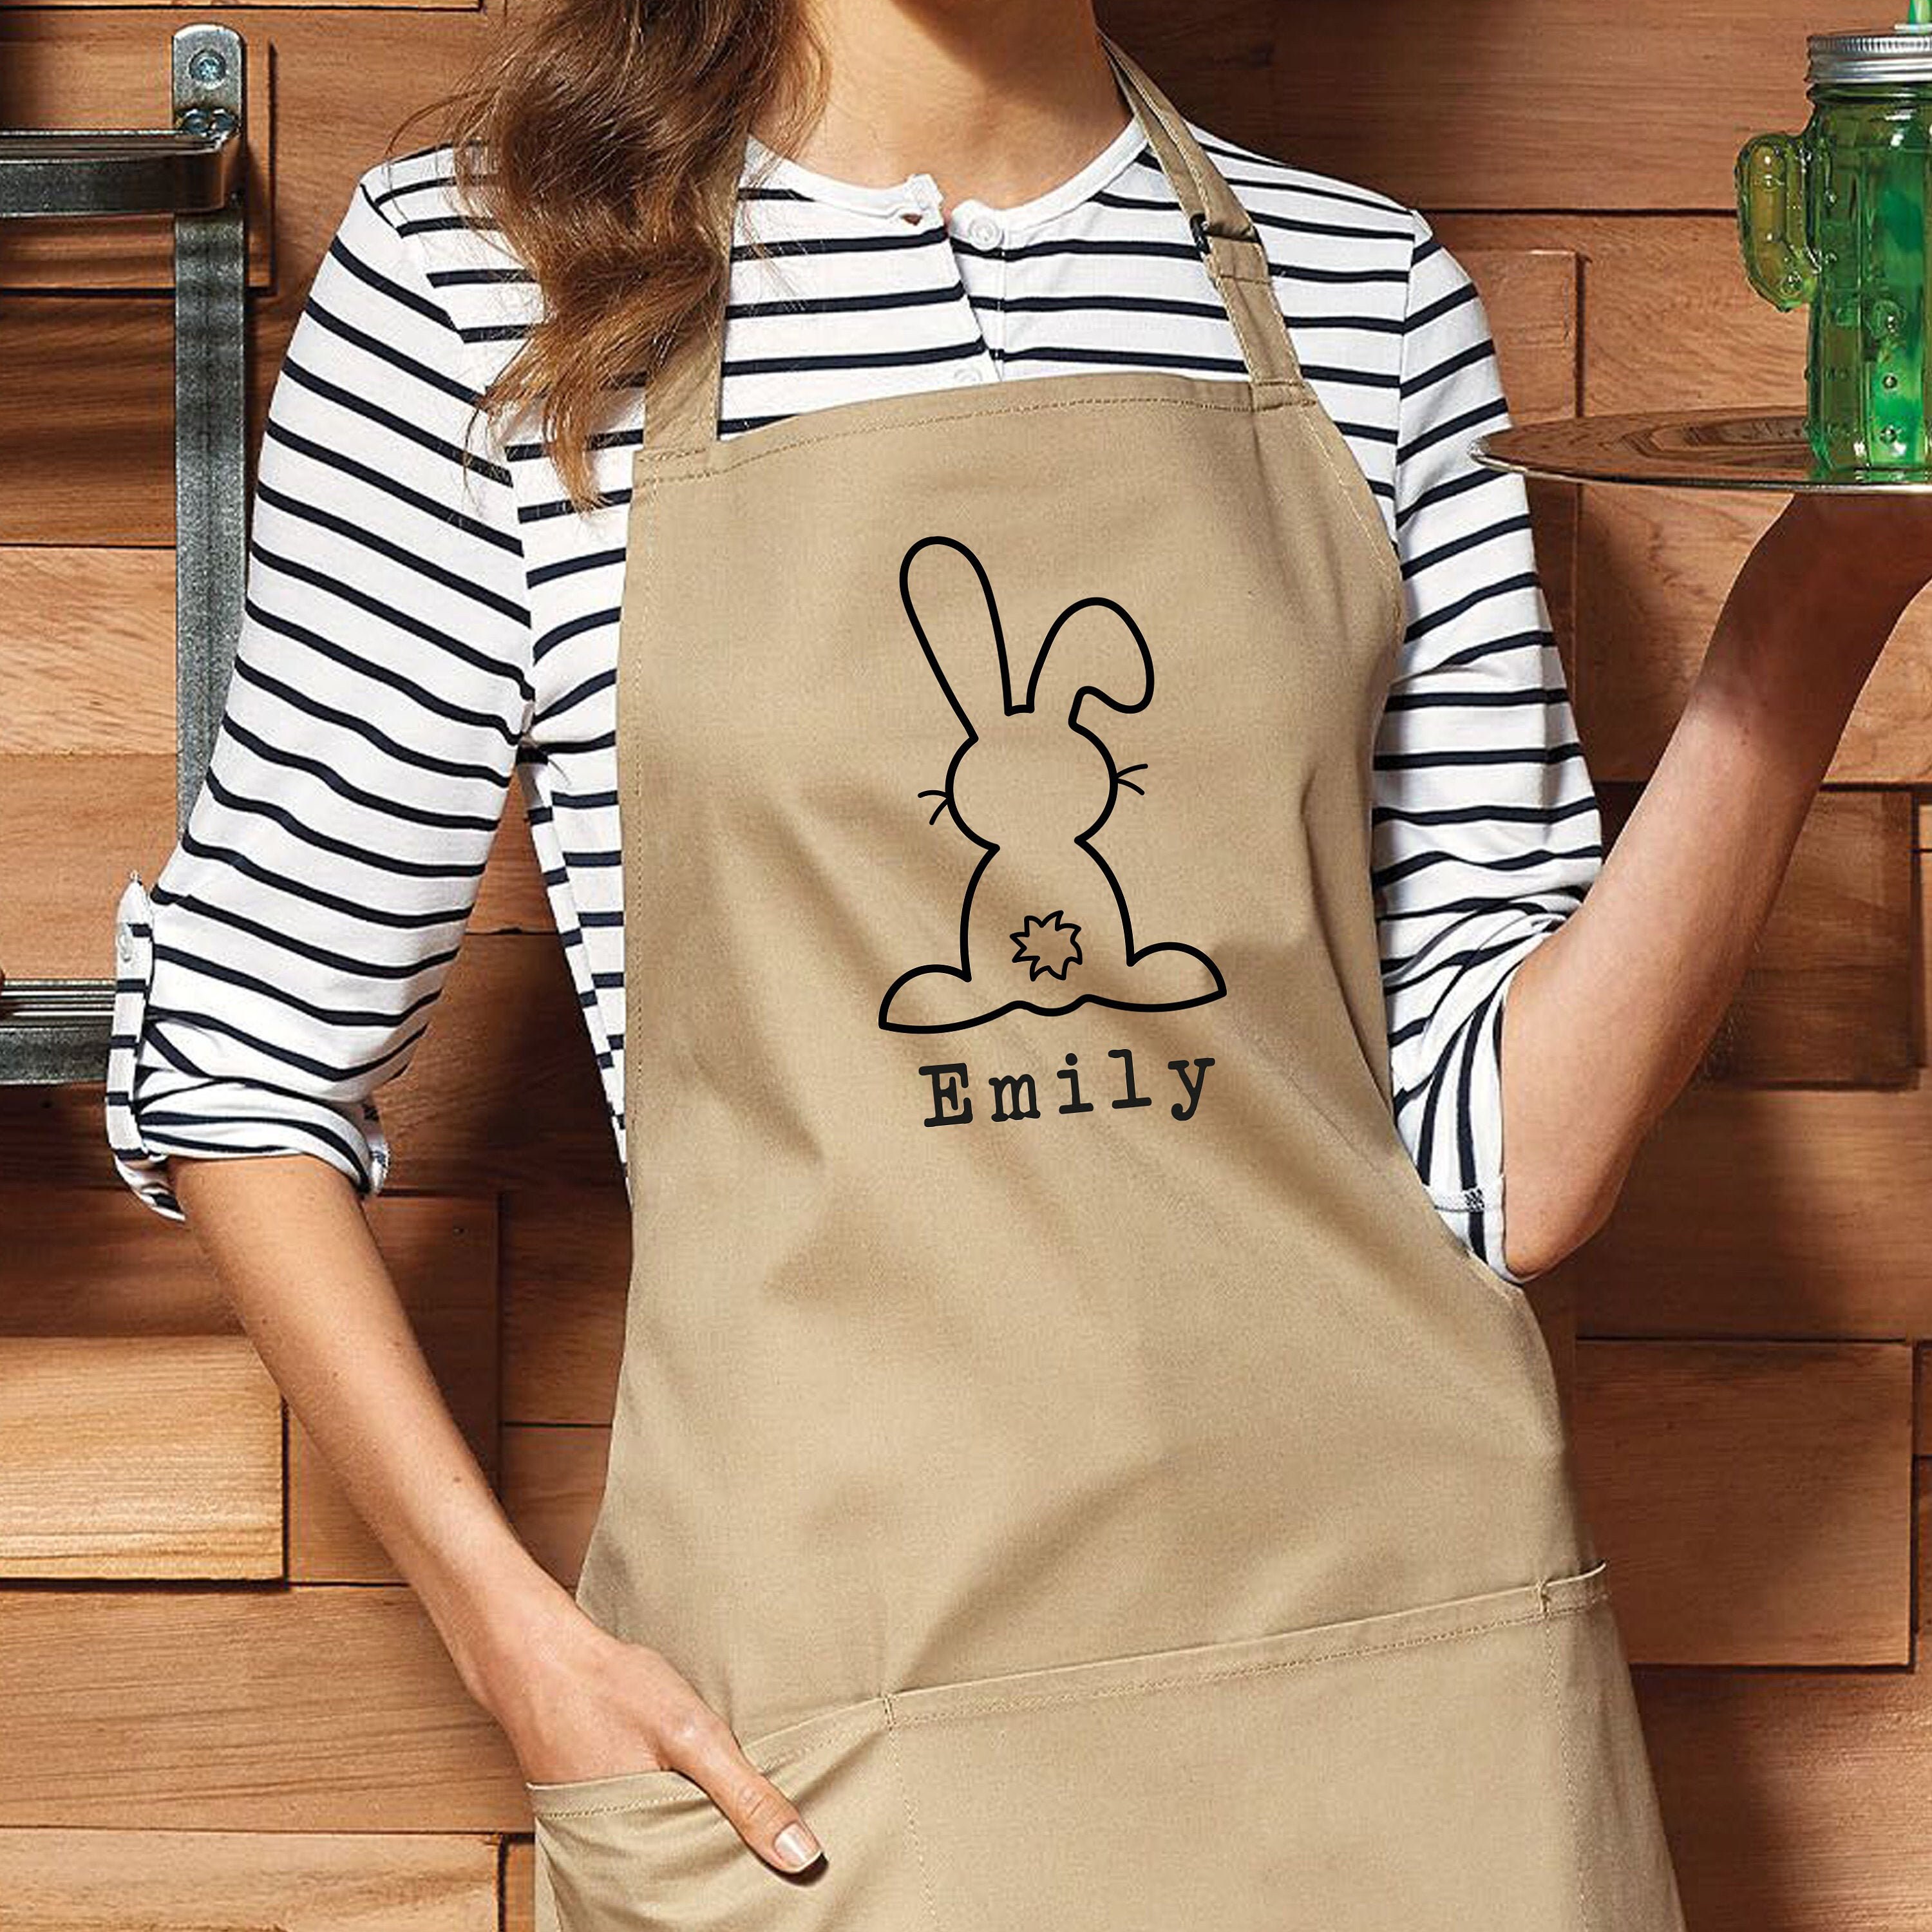 Rabbit Eggs Baking Bib Apron with Adjustable Neckband Pknoclan Happy Easter Day Cooking Apron with Pocket Waterproof Colorful Kitchen Apron for East 